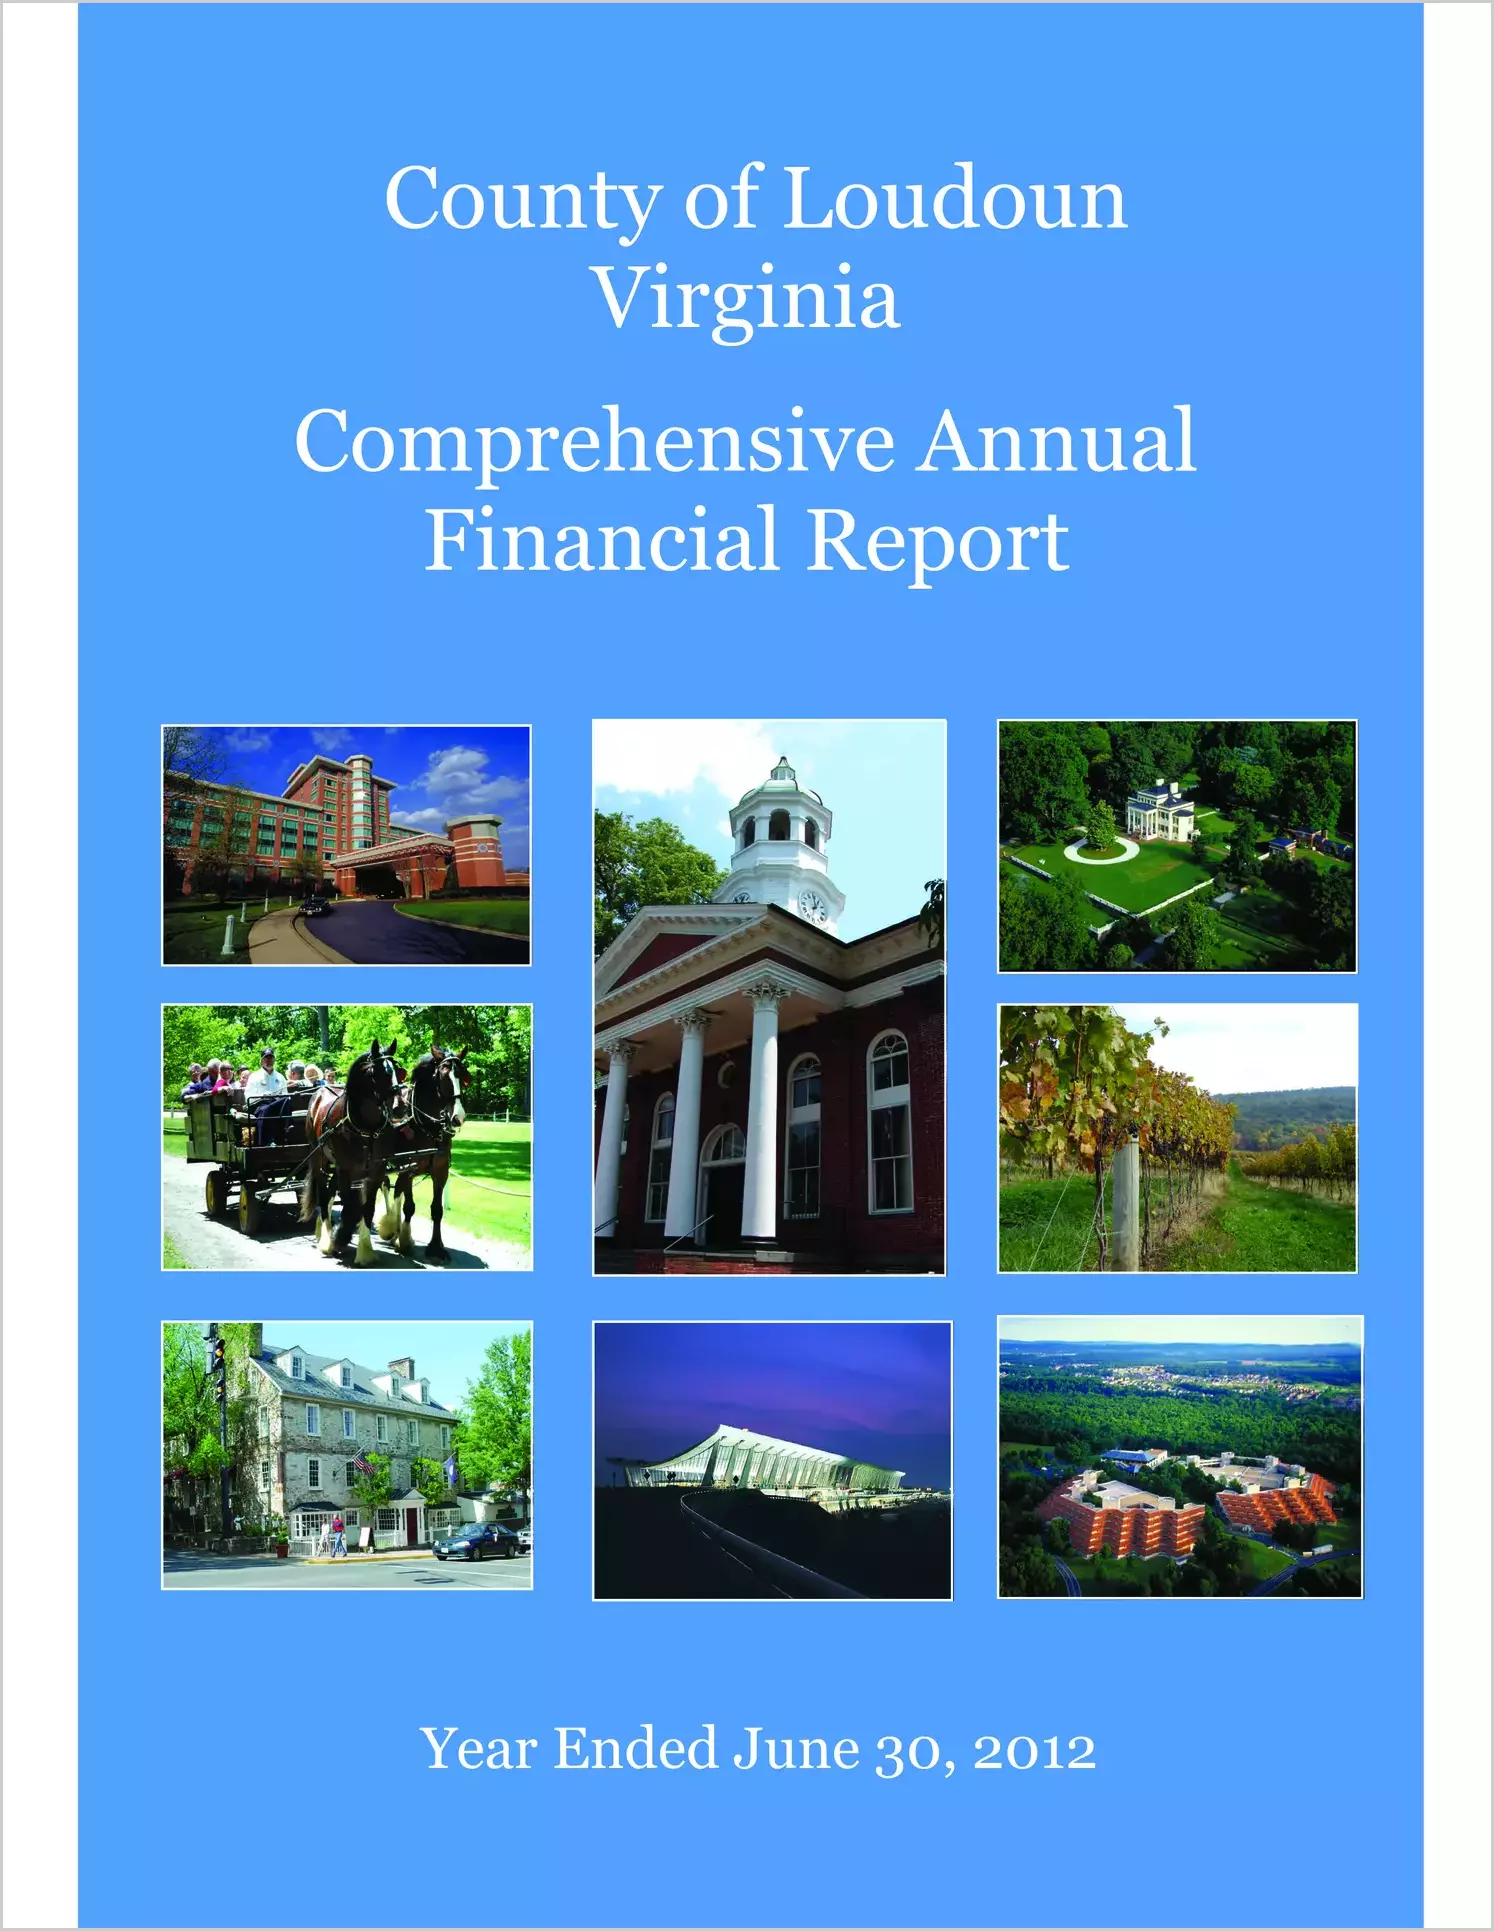 2012 Annual Financial Report for County of Loudoun